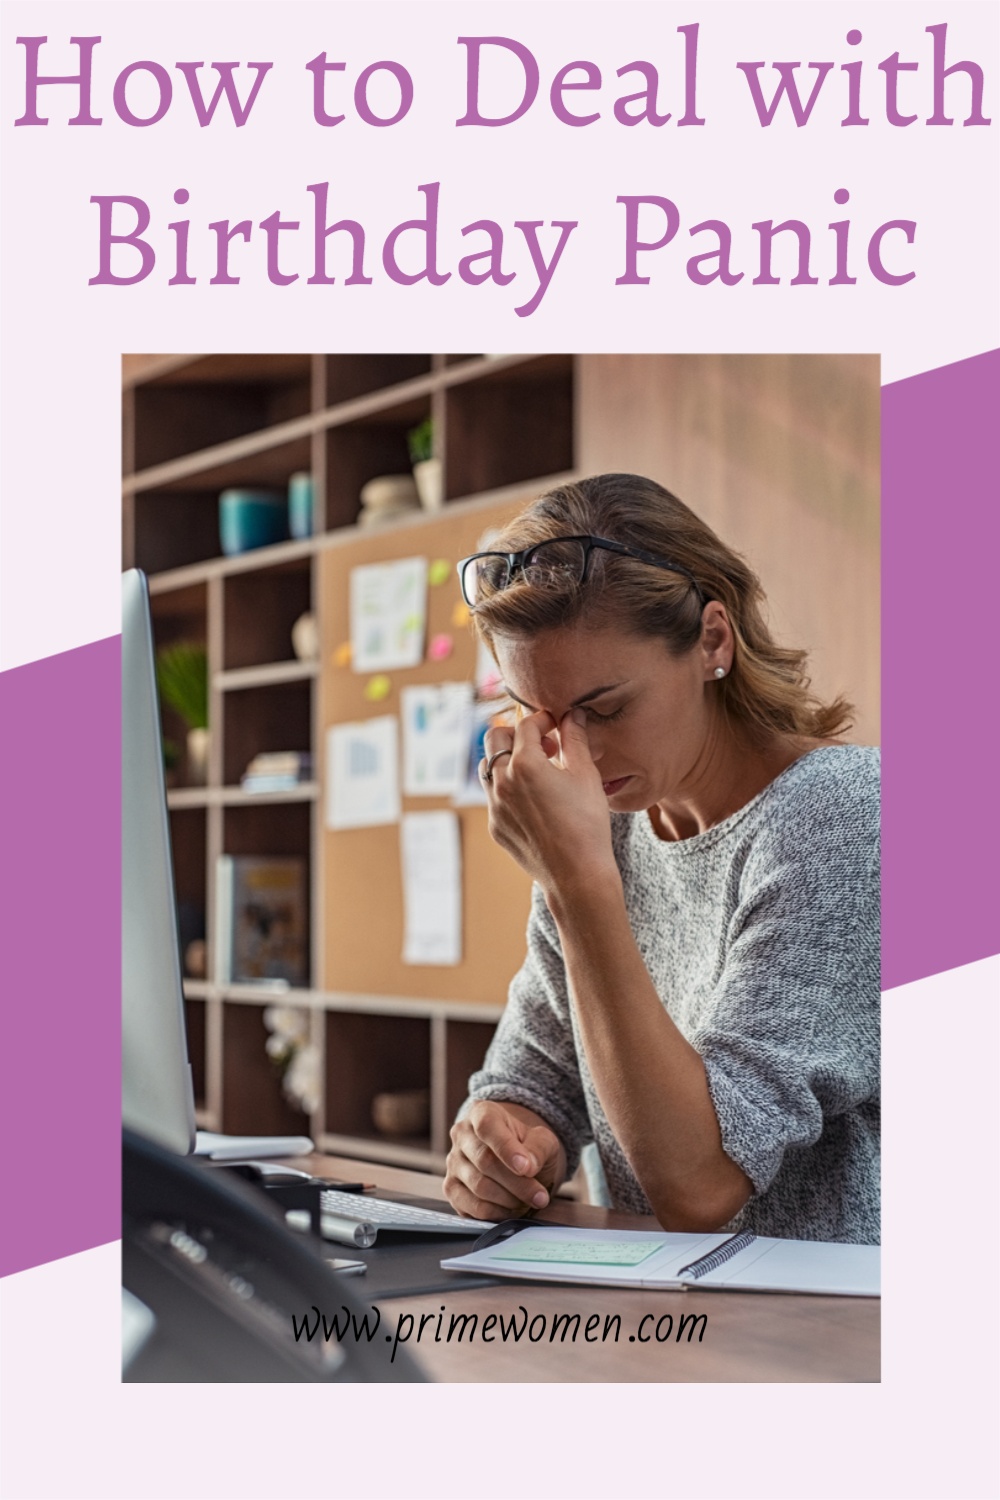 How to deal with Birthday Panic